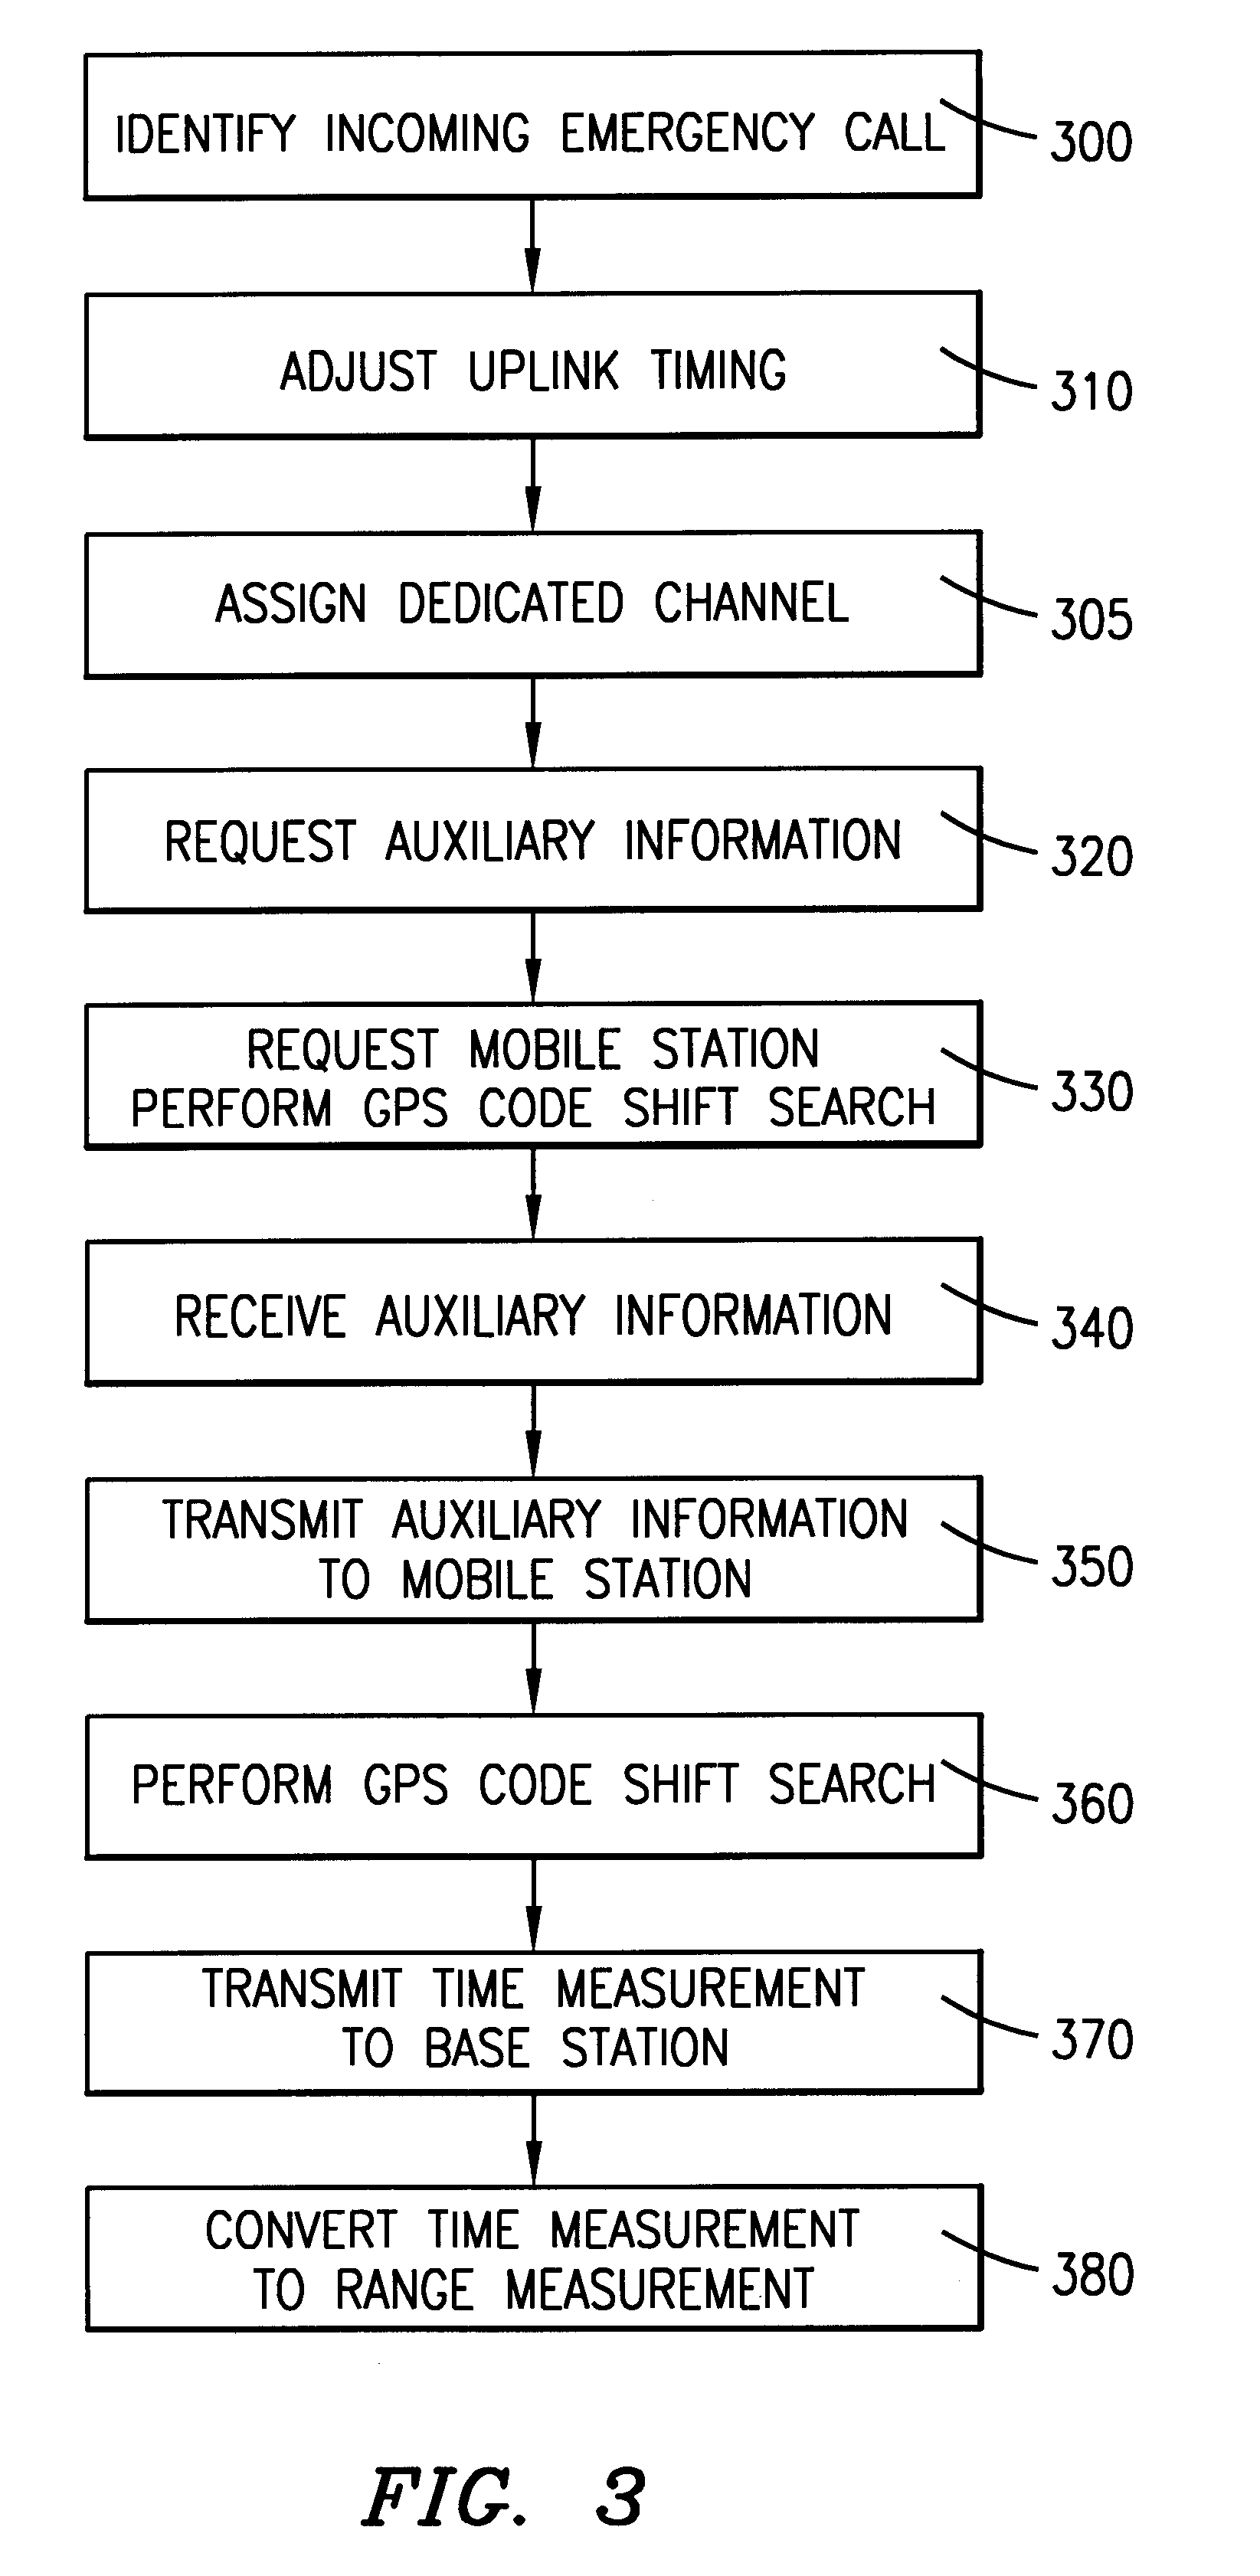 Method and apparatus for communicating auxilliary information and location information between a cellular telephone network and a global positioning system receiver for reducing code shift search time of the receiver